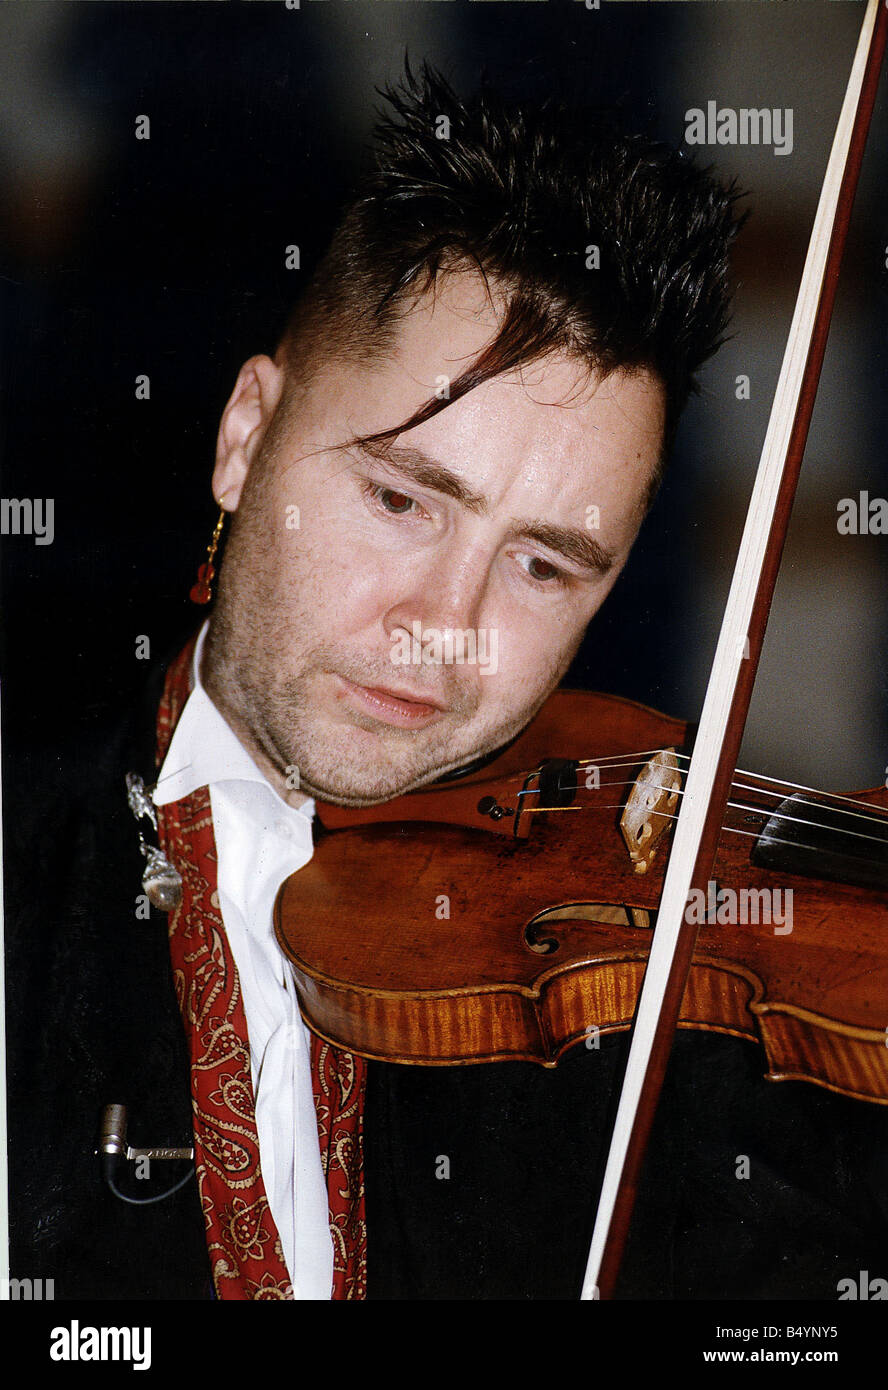 Finding The Best Bass Guitar For Music Lovers – Nigel Kennedy